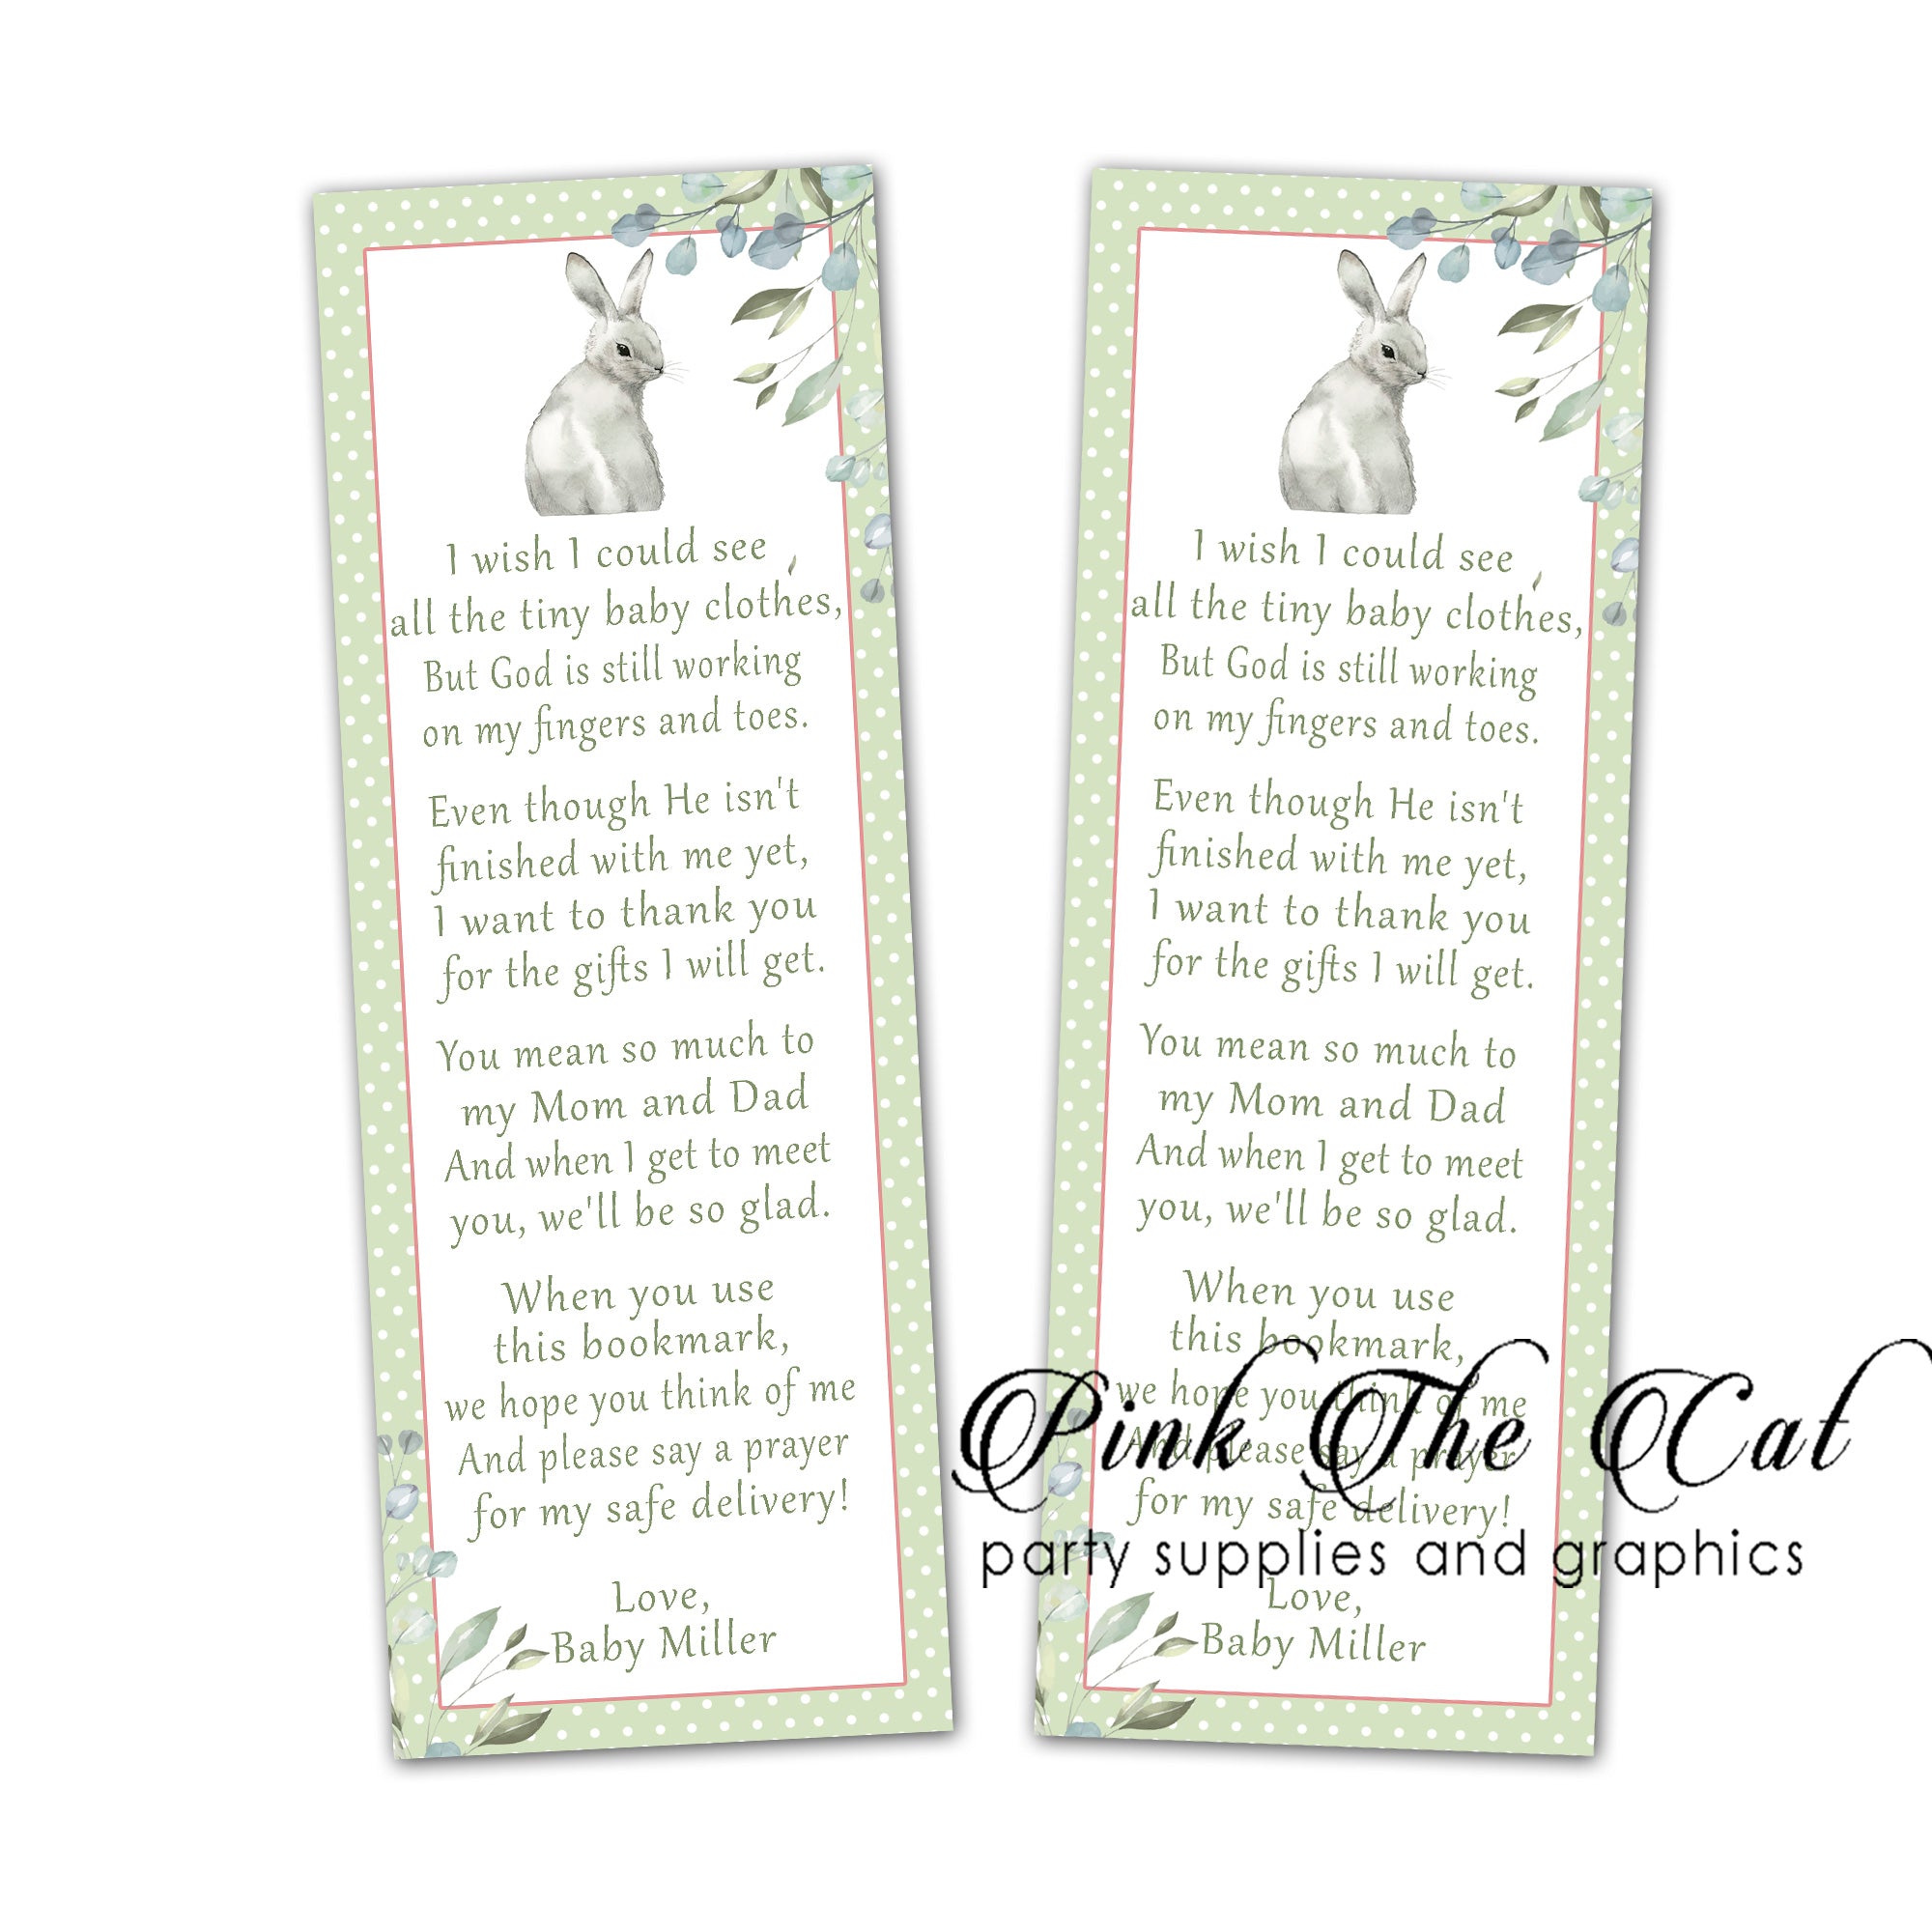 Rabbit Bunny green bookmarks baby shower favors printable